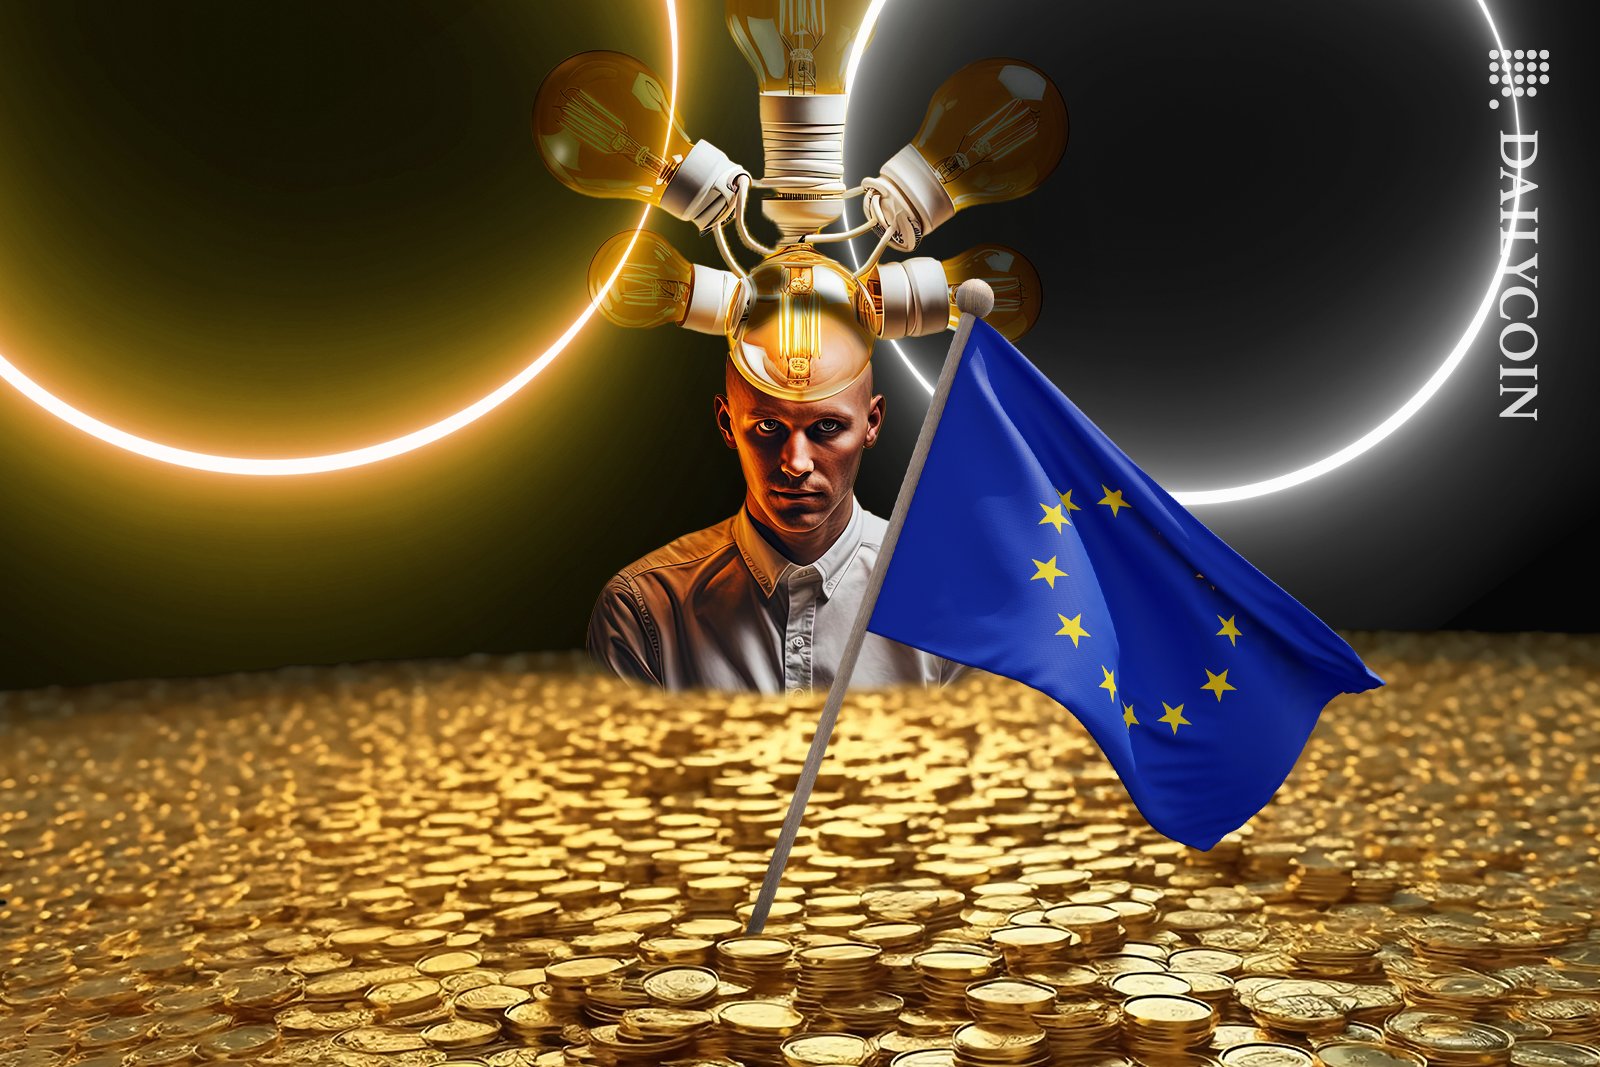 Guy stuck in coins has lots of ideas for EU crypto regulations.